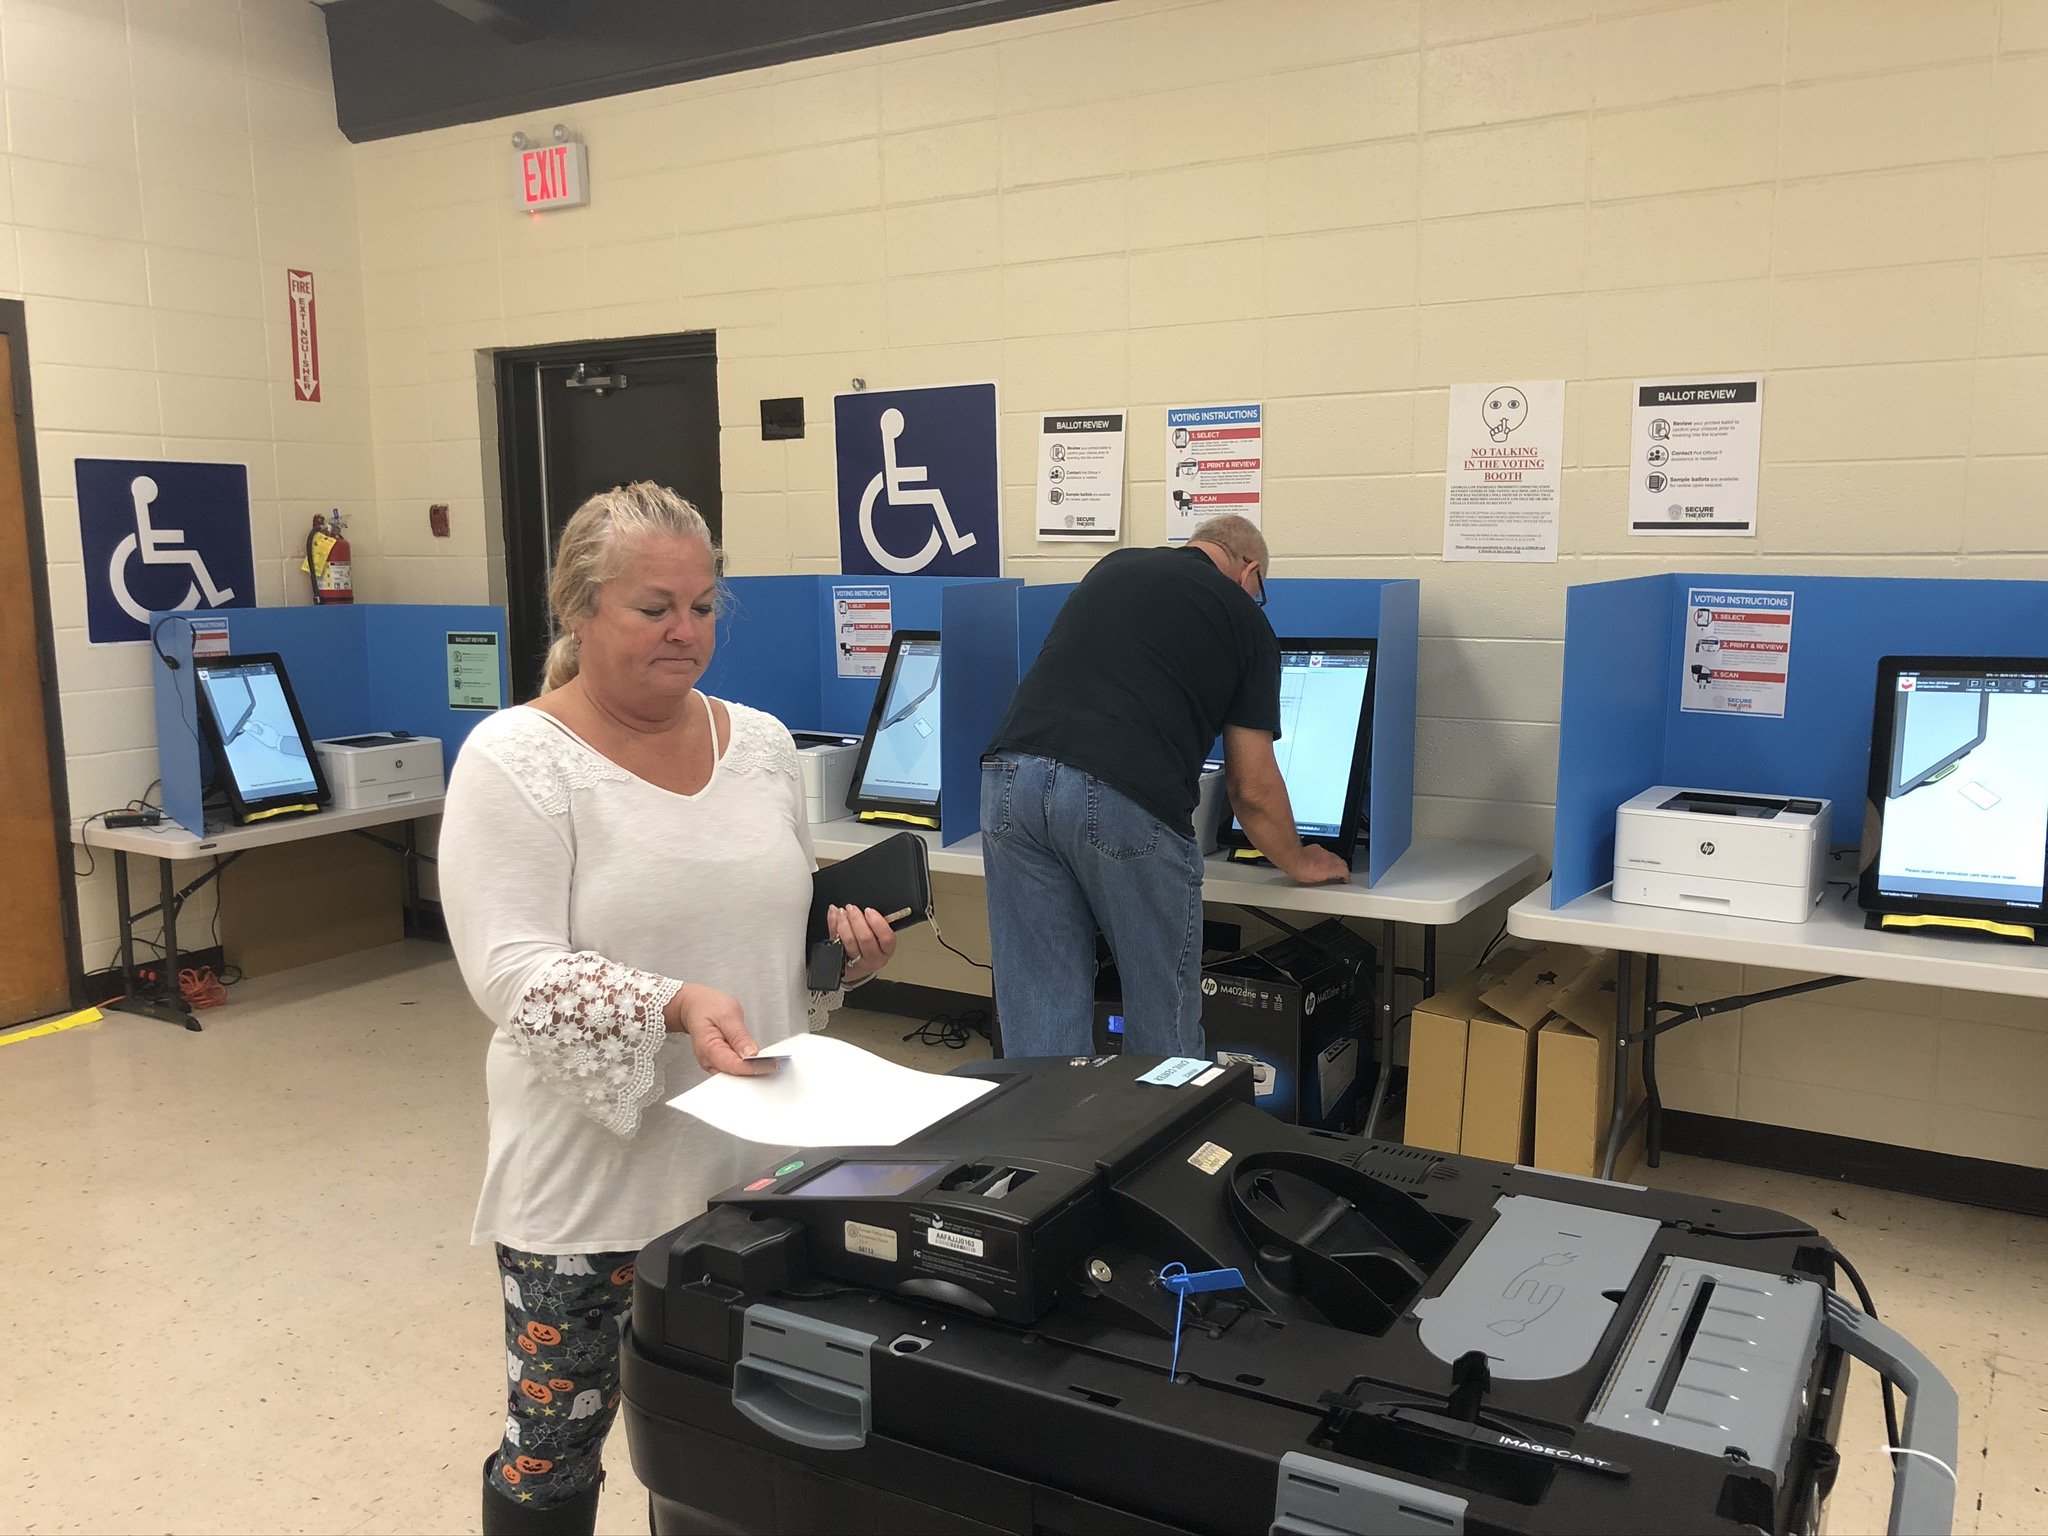 About 9,000 voters have tested Georgia's new voting system so far